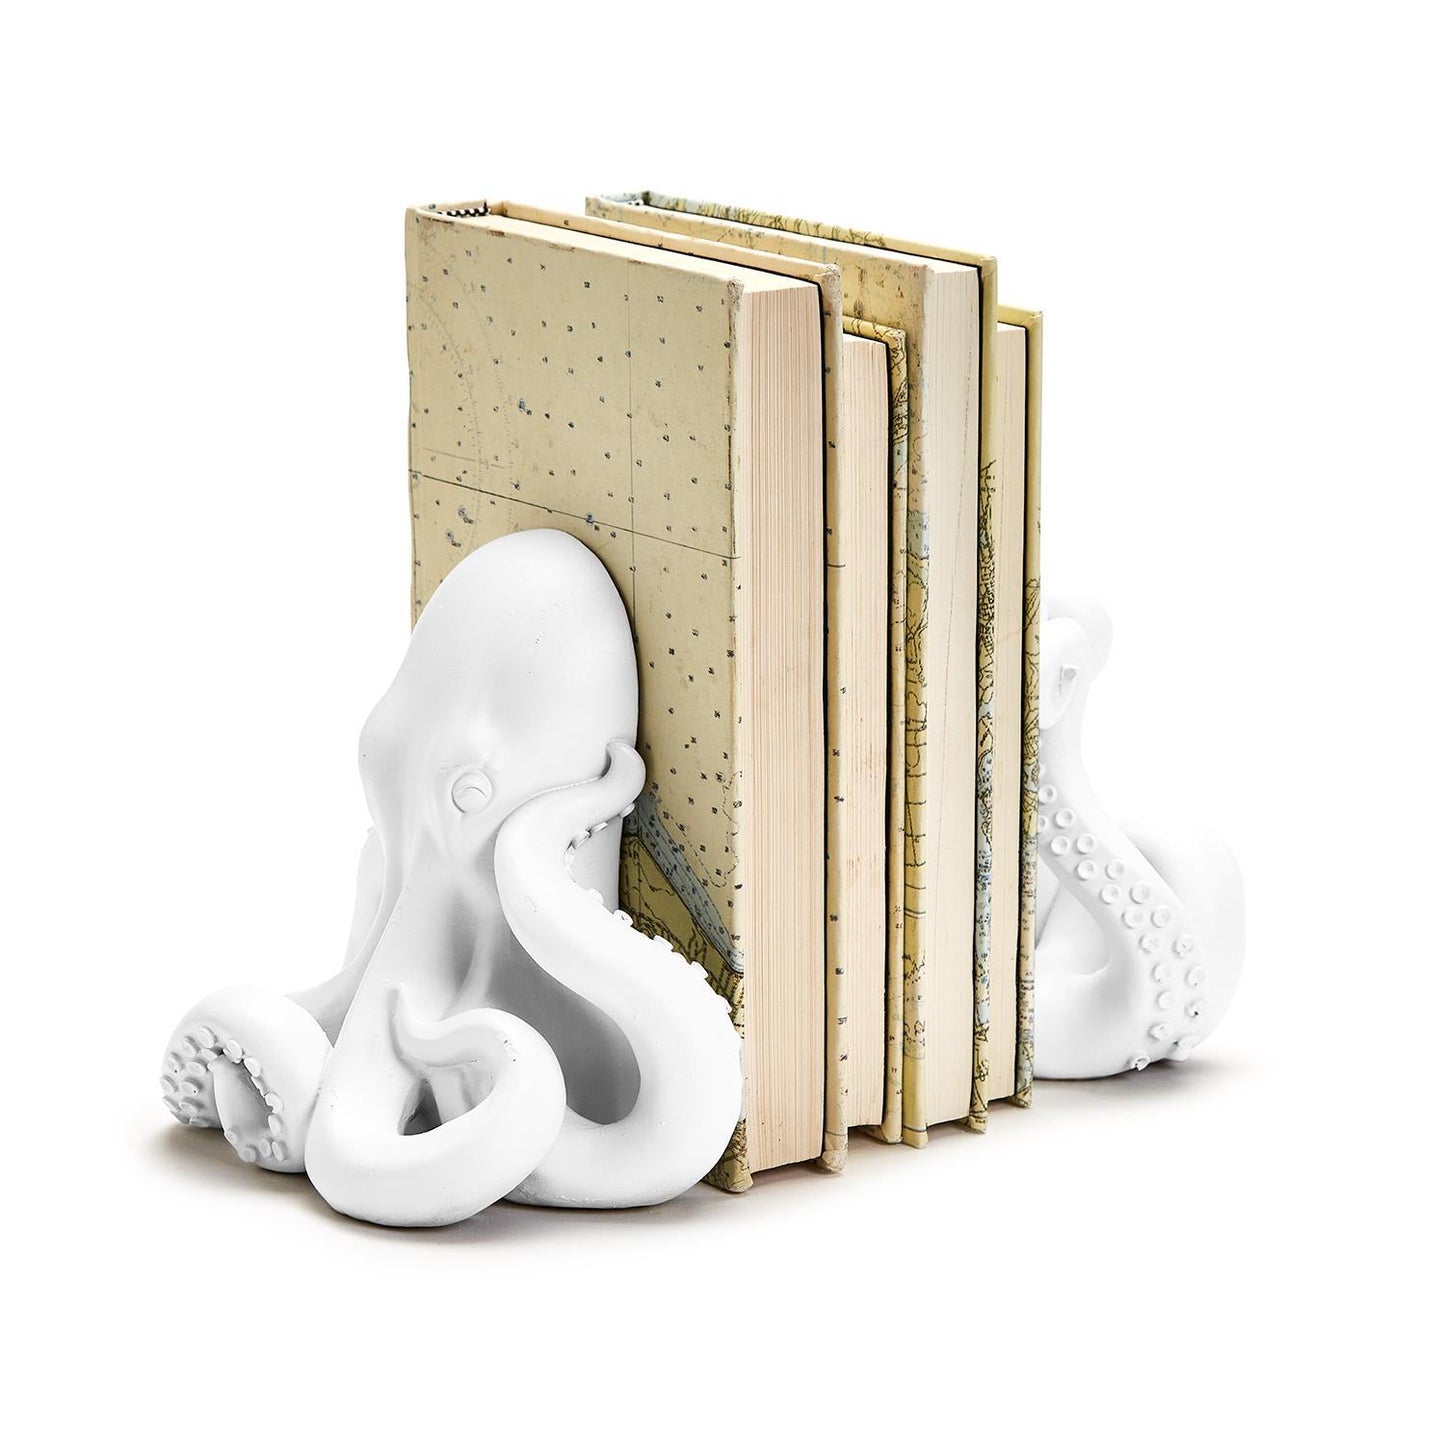 Octopus Bookend